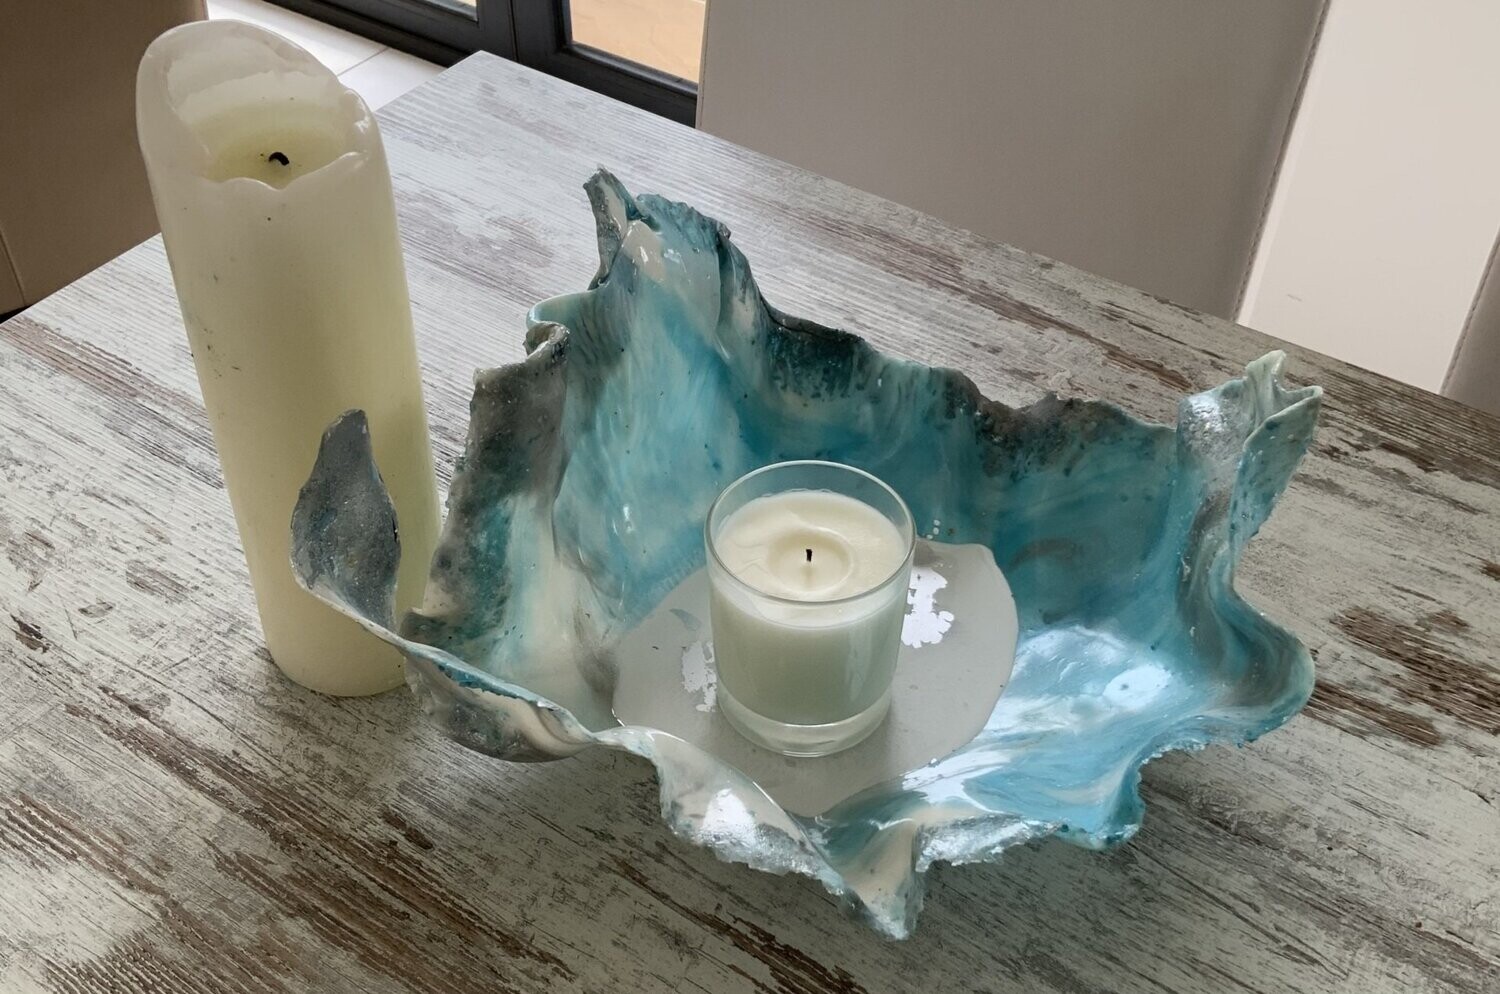 Handmade resin medium sculpture bowl. Light Blue, dark silver and white fruit, candle or trinket shallow bowl edged in blue glass chips